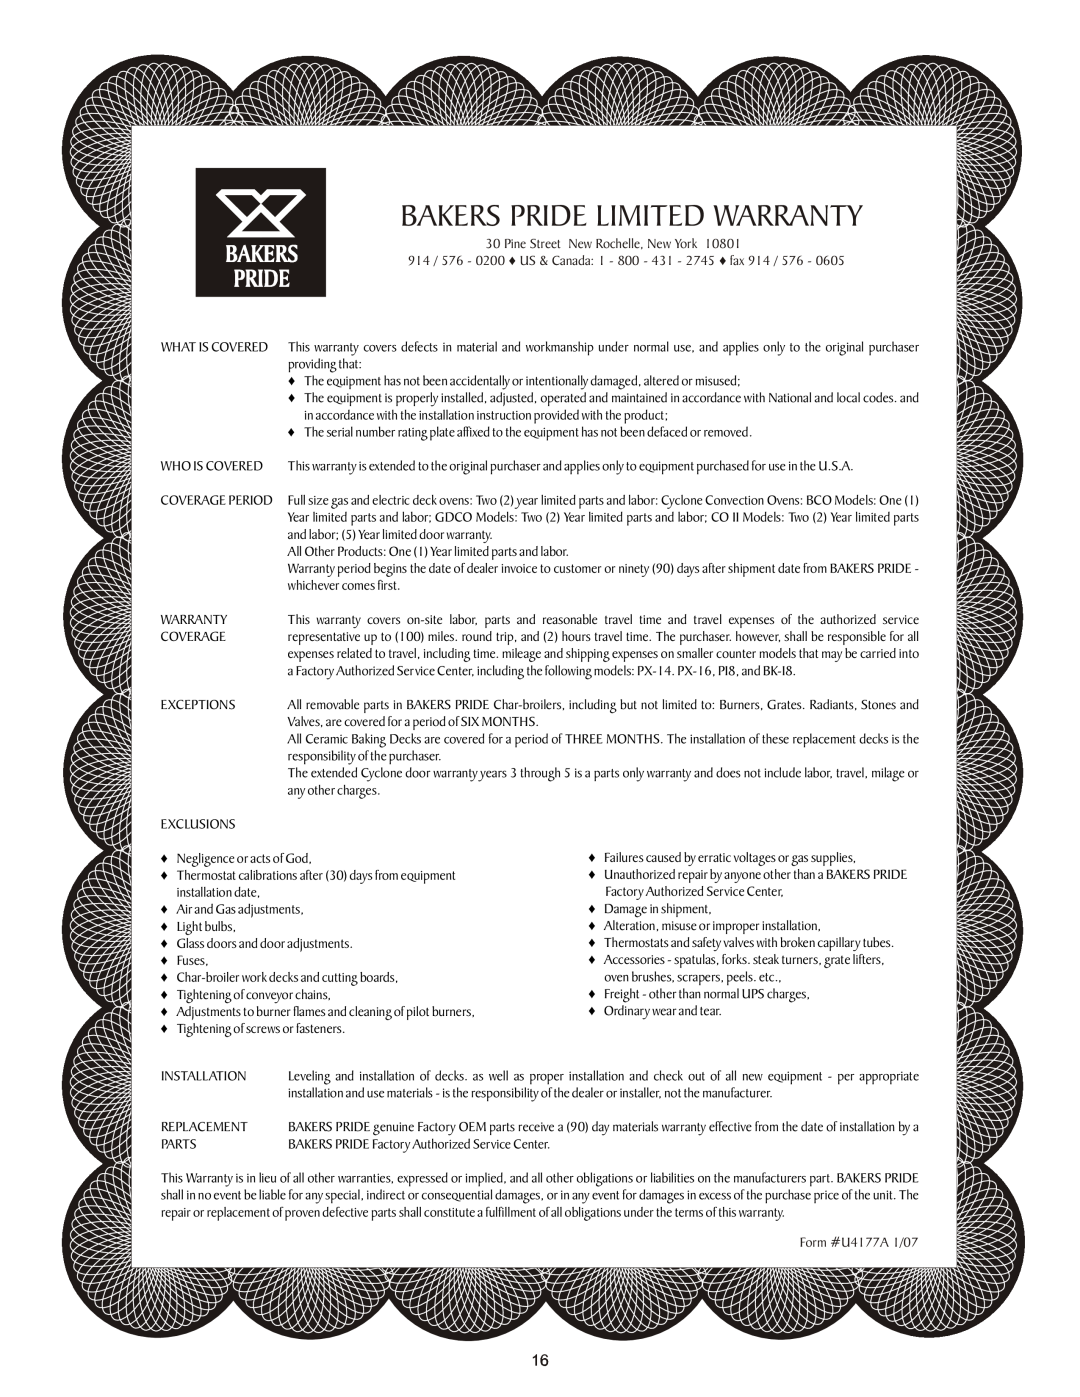 Bakers Pride Oven BCO-G, GDCO-G manual Bakers Pride Limited Warranty, Pine Street New Rochelle, New York, Form #U4177A 1/07 